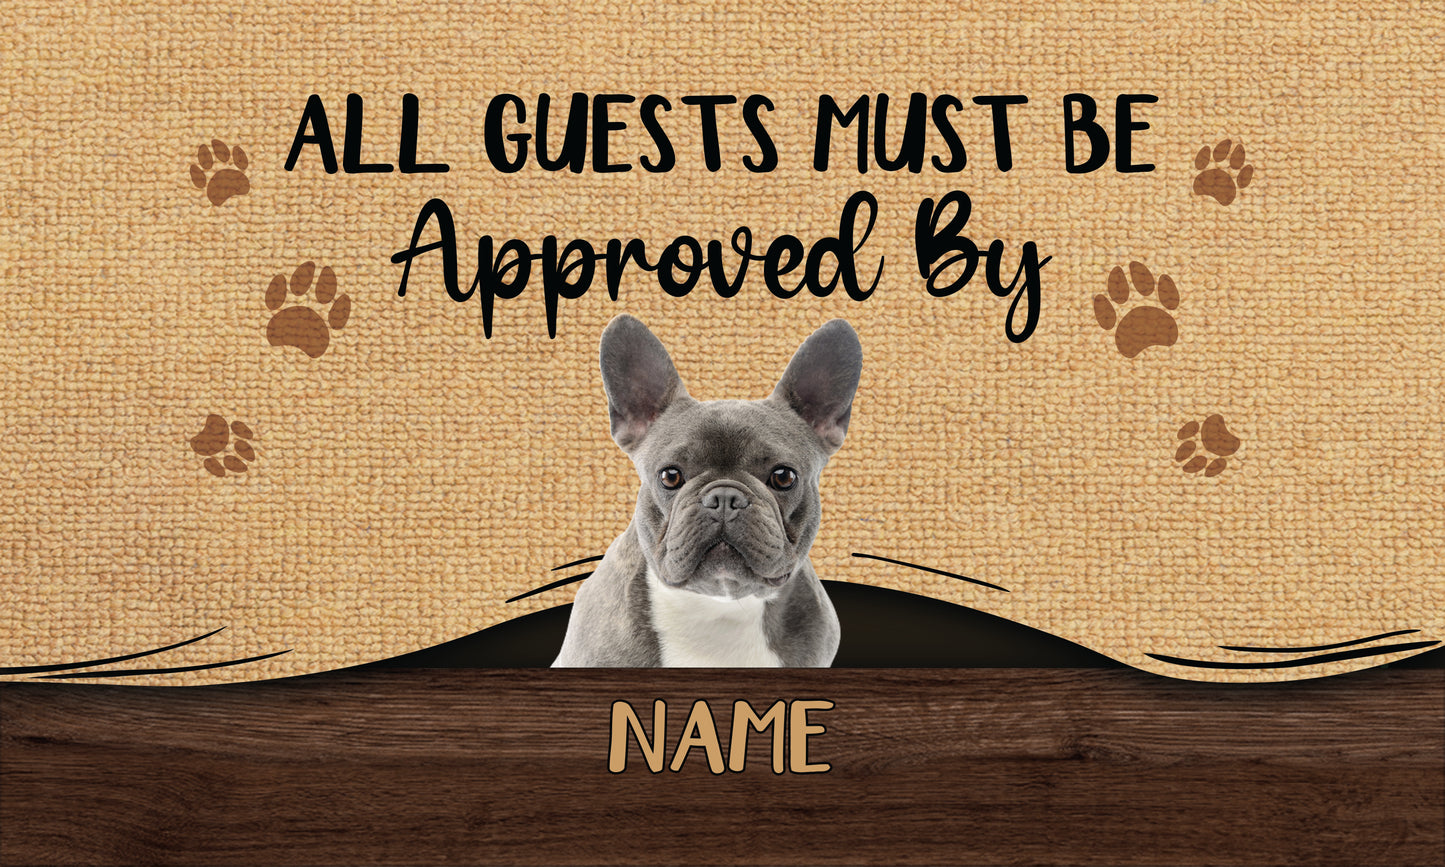 Personalize All Pet Must Be Approved By Doormat